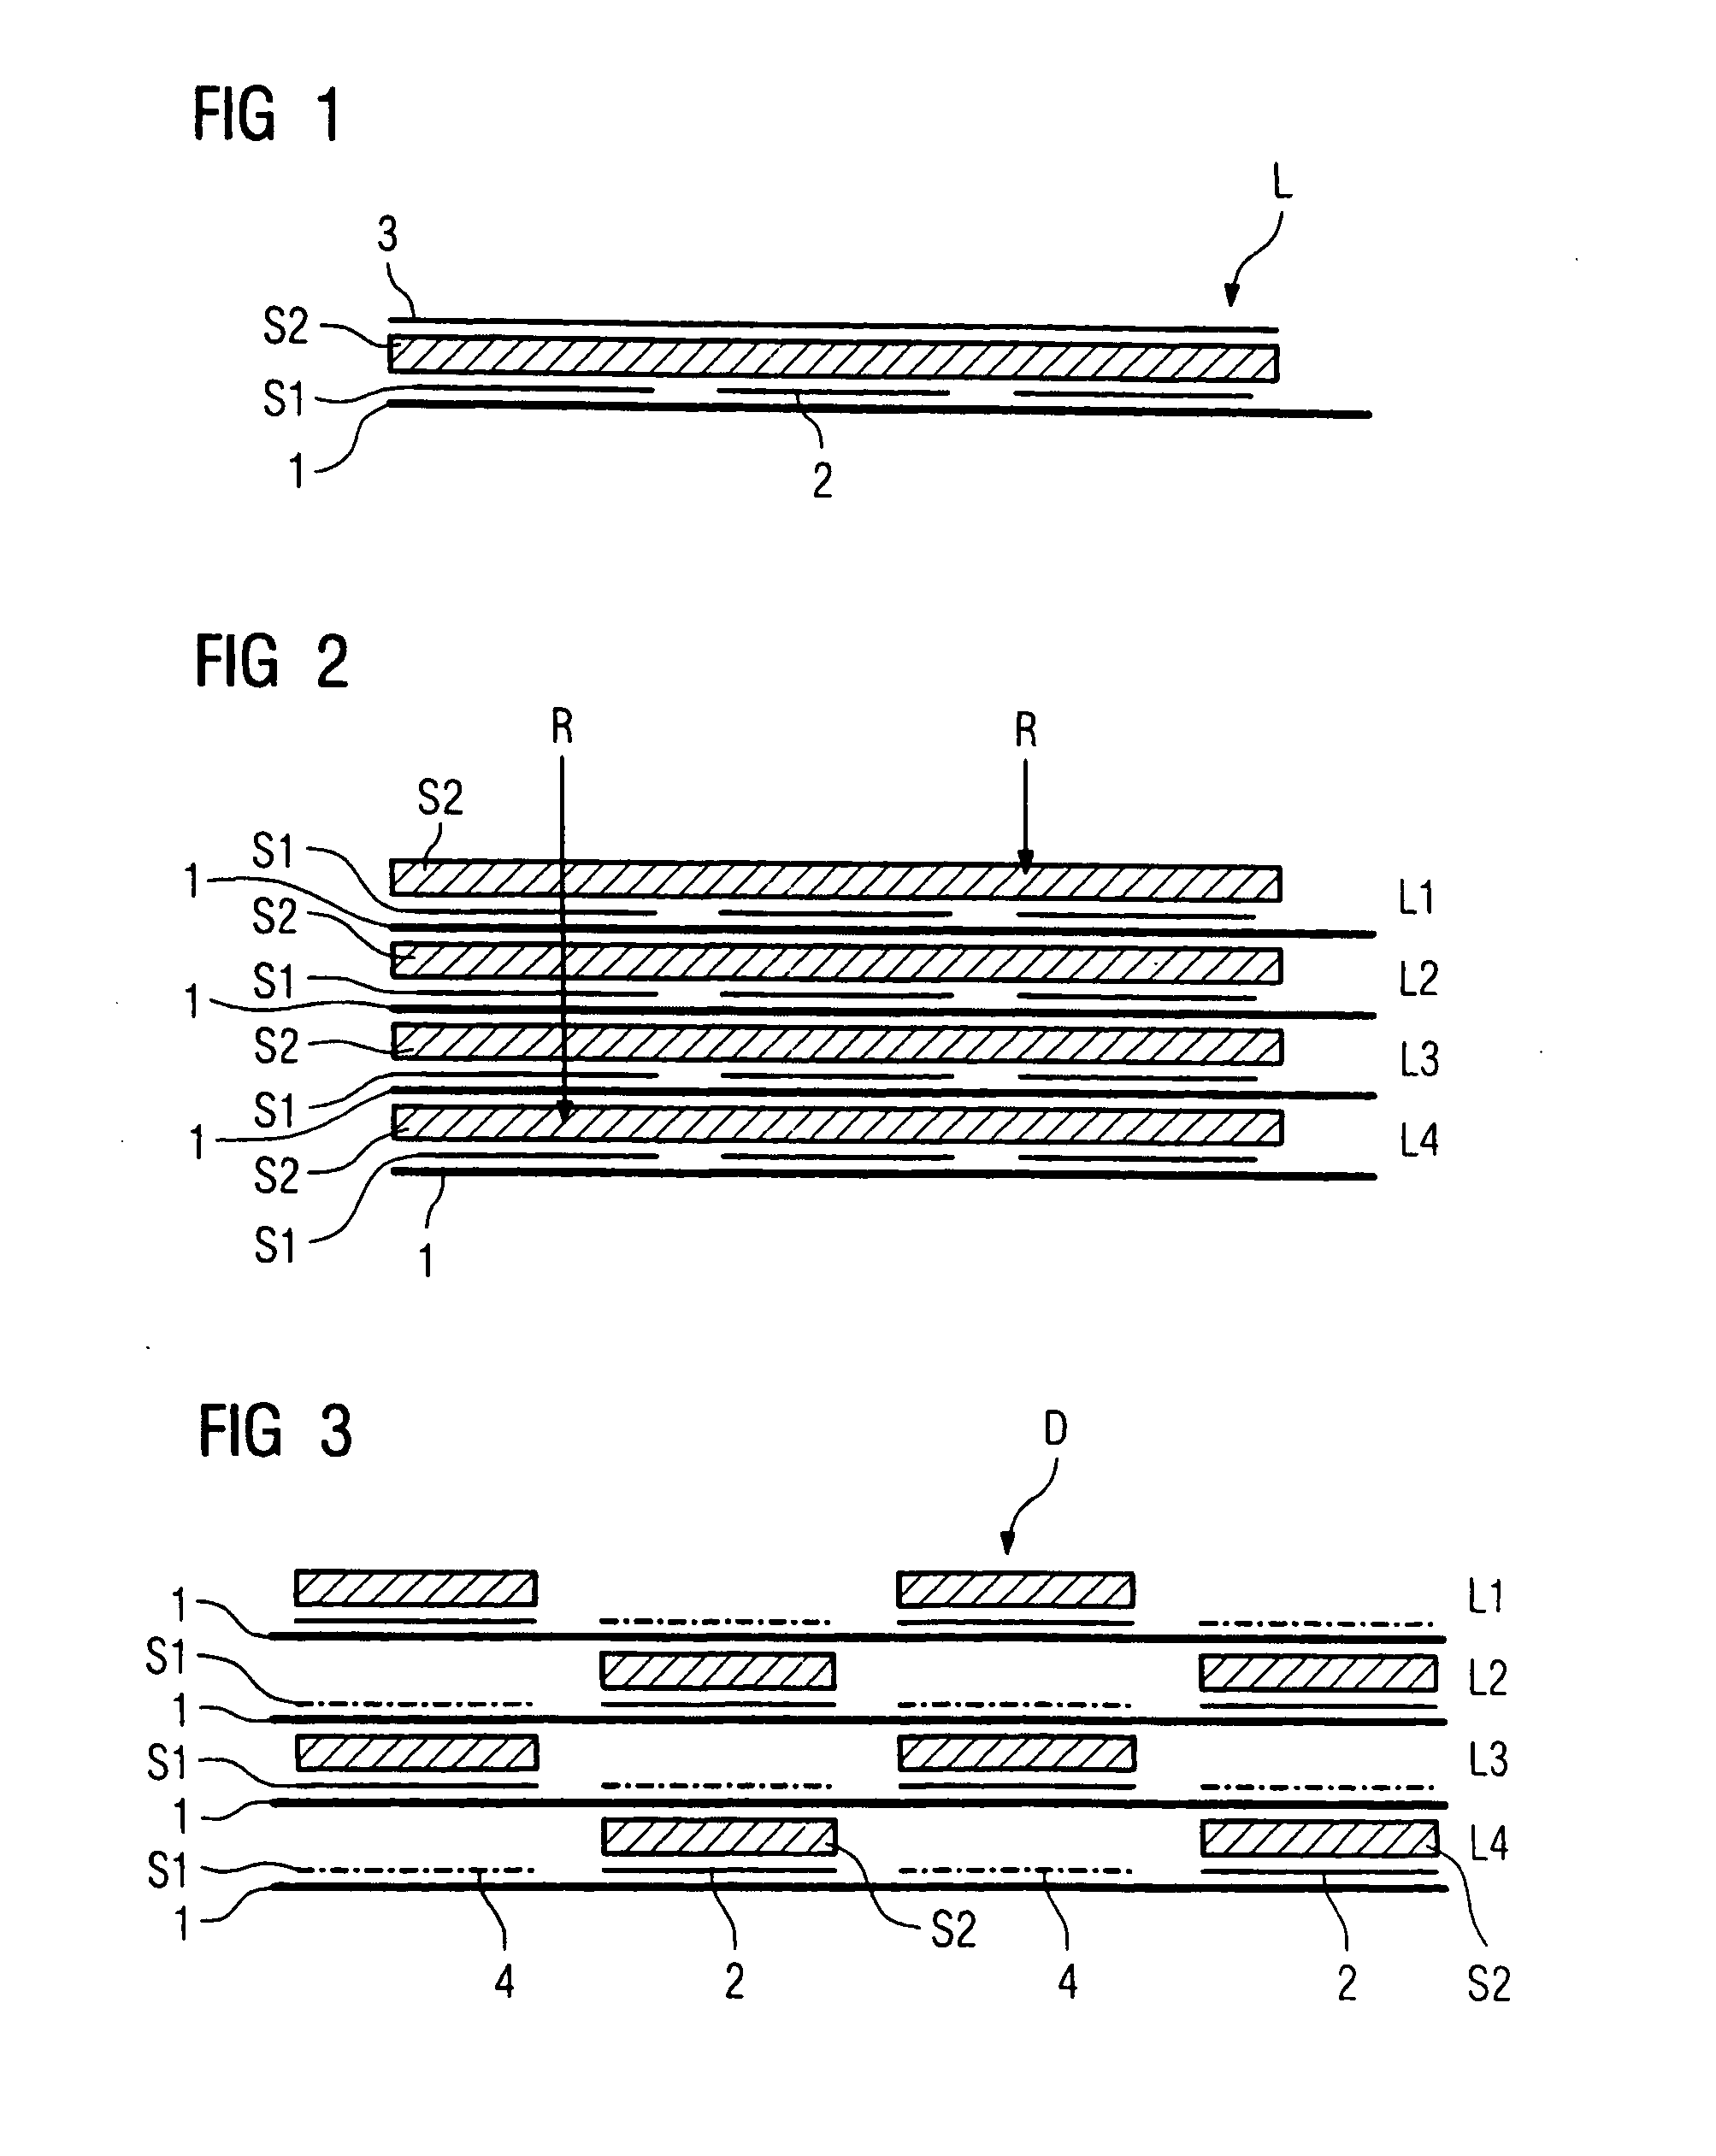 X-ray detector and method for production of x-ray images with spectral resolution